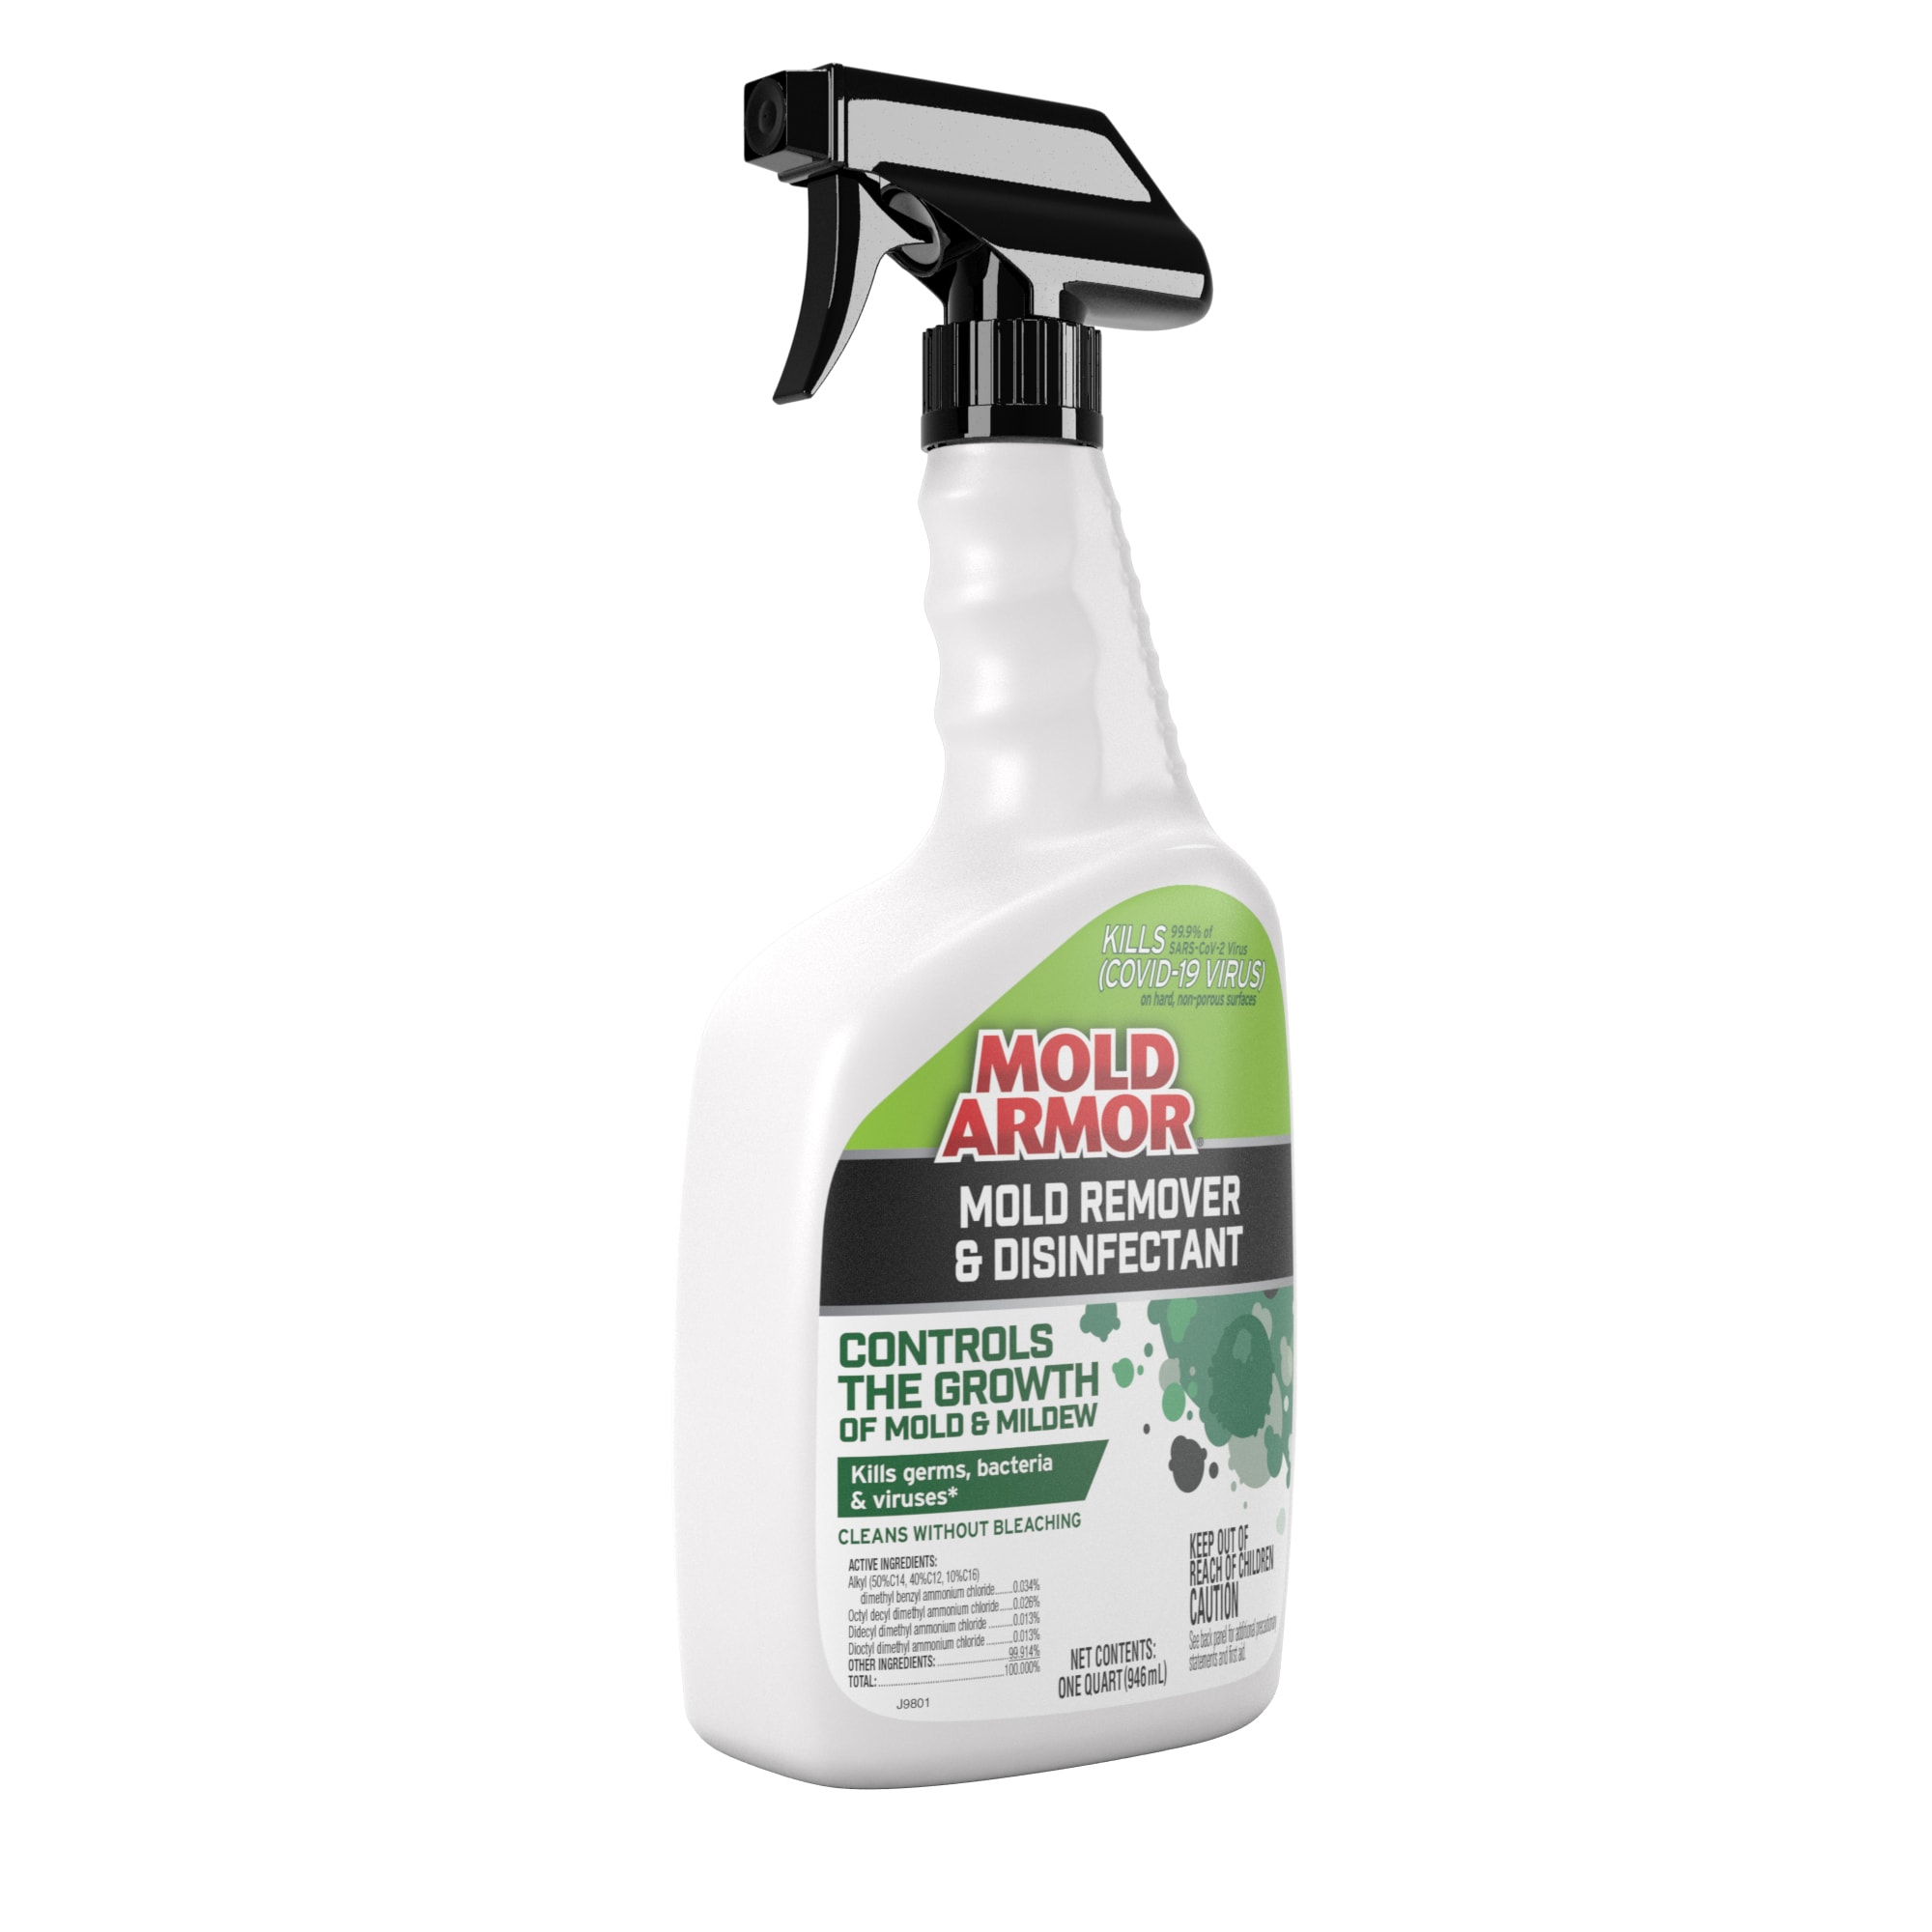 Mold Armor Mold Remover and Disinfectant Cleaner - 32 oz. Spray Bottle, Kills 99% of Bacteria, Destroys Odors